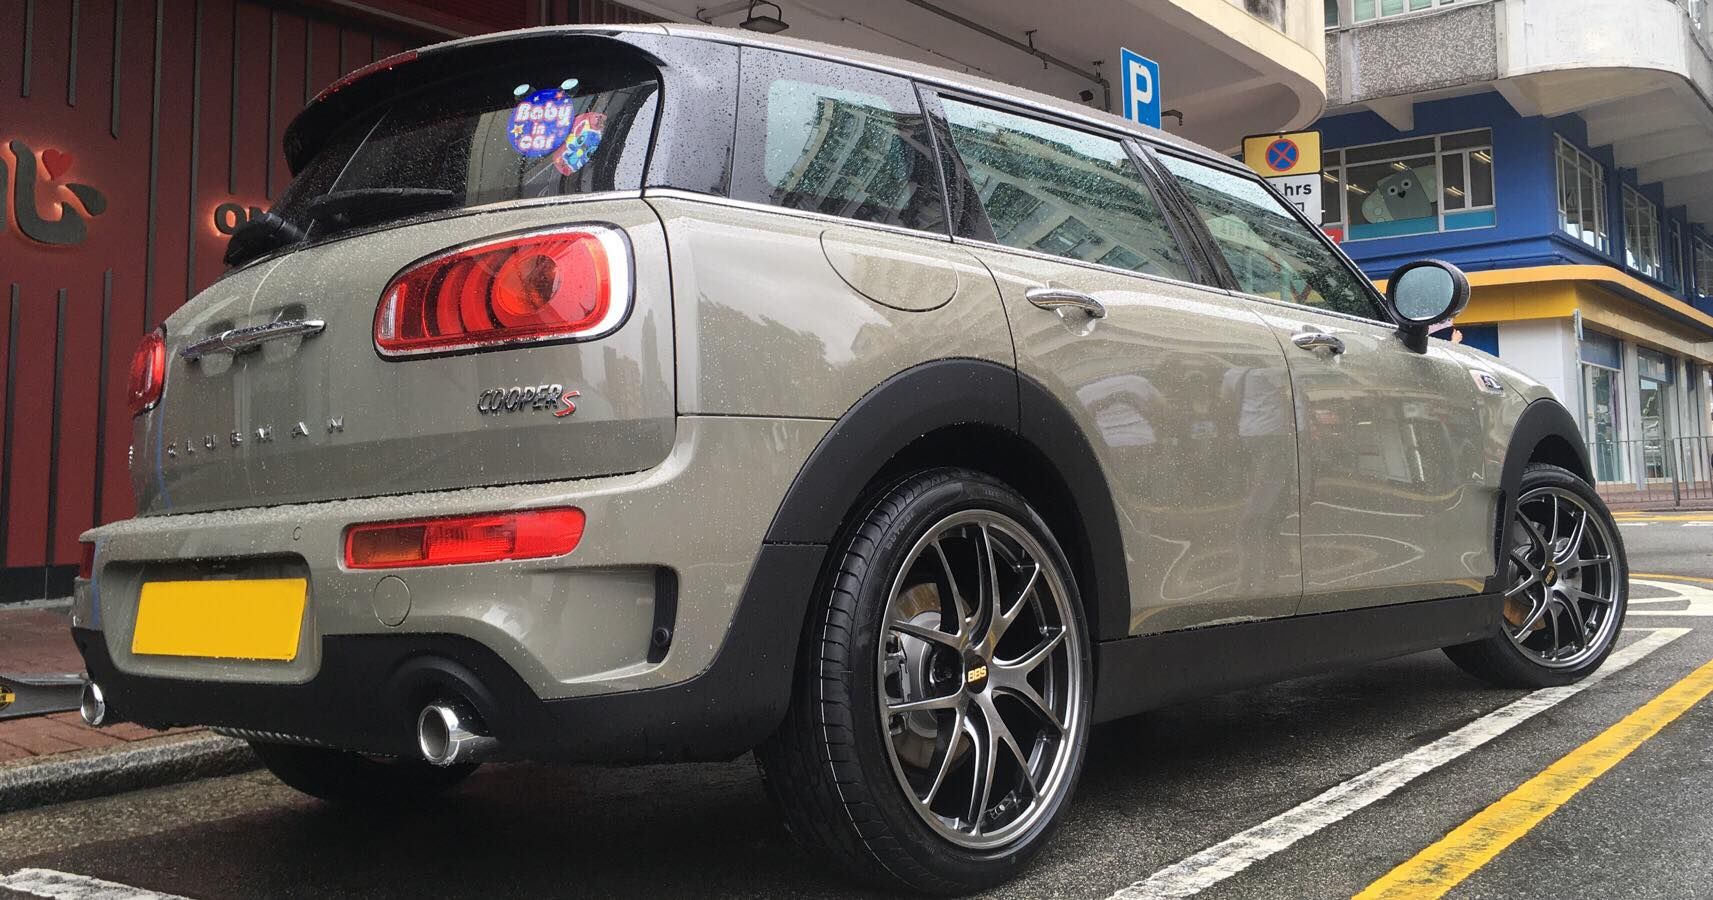 https://wheelfront.com/wp-content/uploads/formidable/8/mini-cooper-clubman-with-bbs-ria-wheels-1.jpg